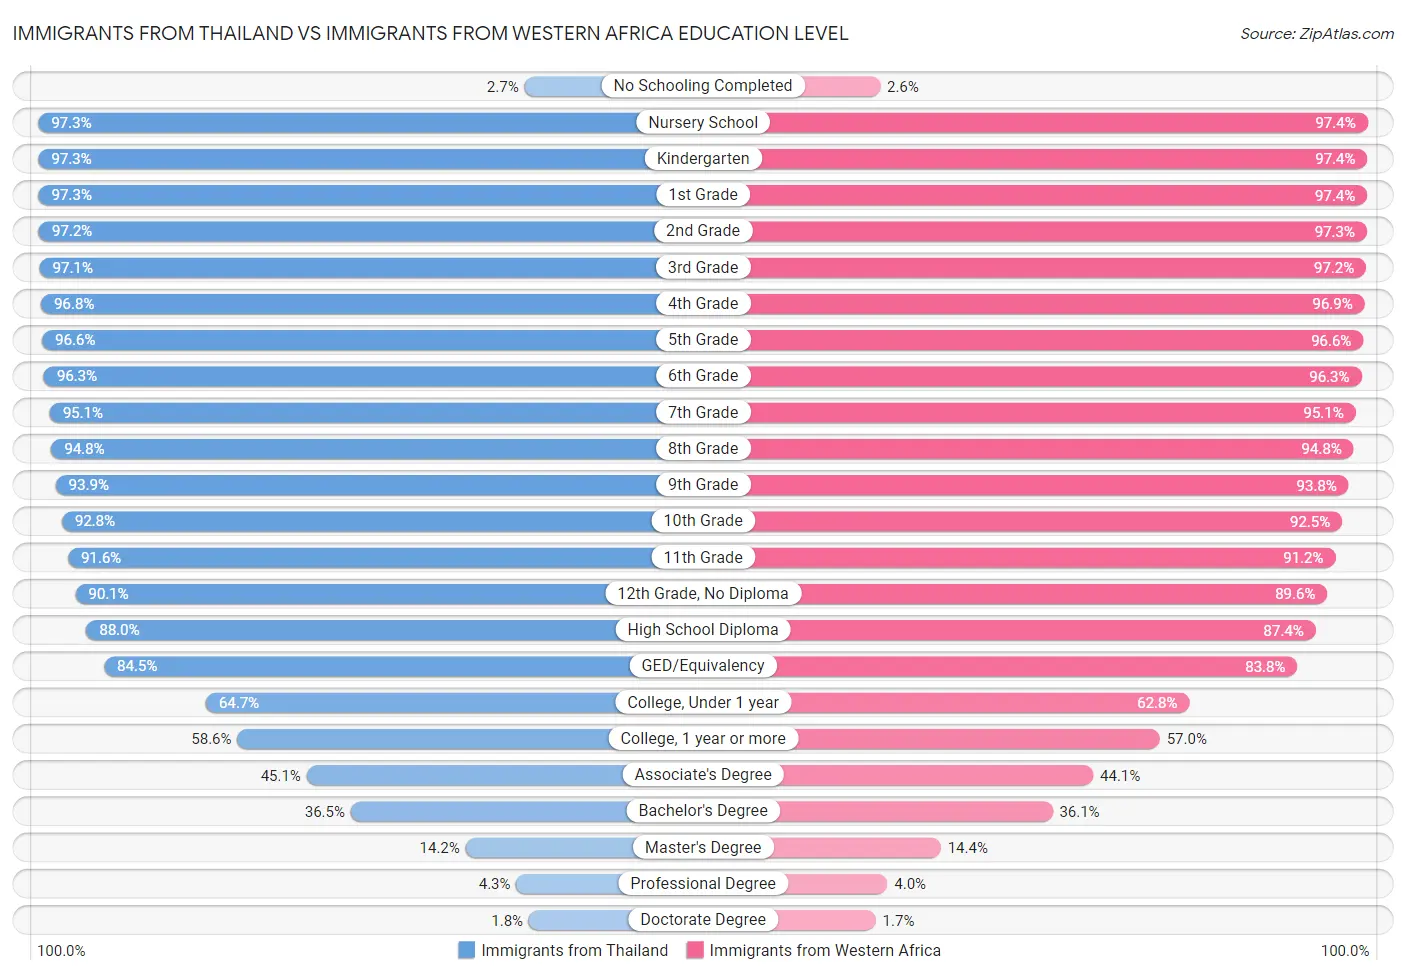 Immigrants from Thailand vs Immigrants from Western Africa Education Level